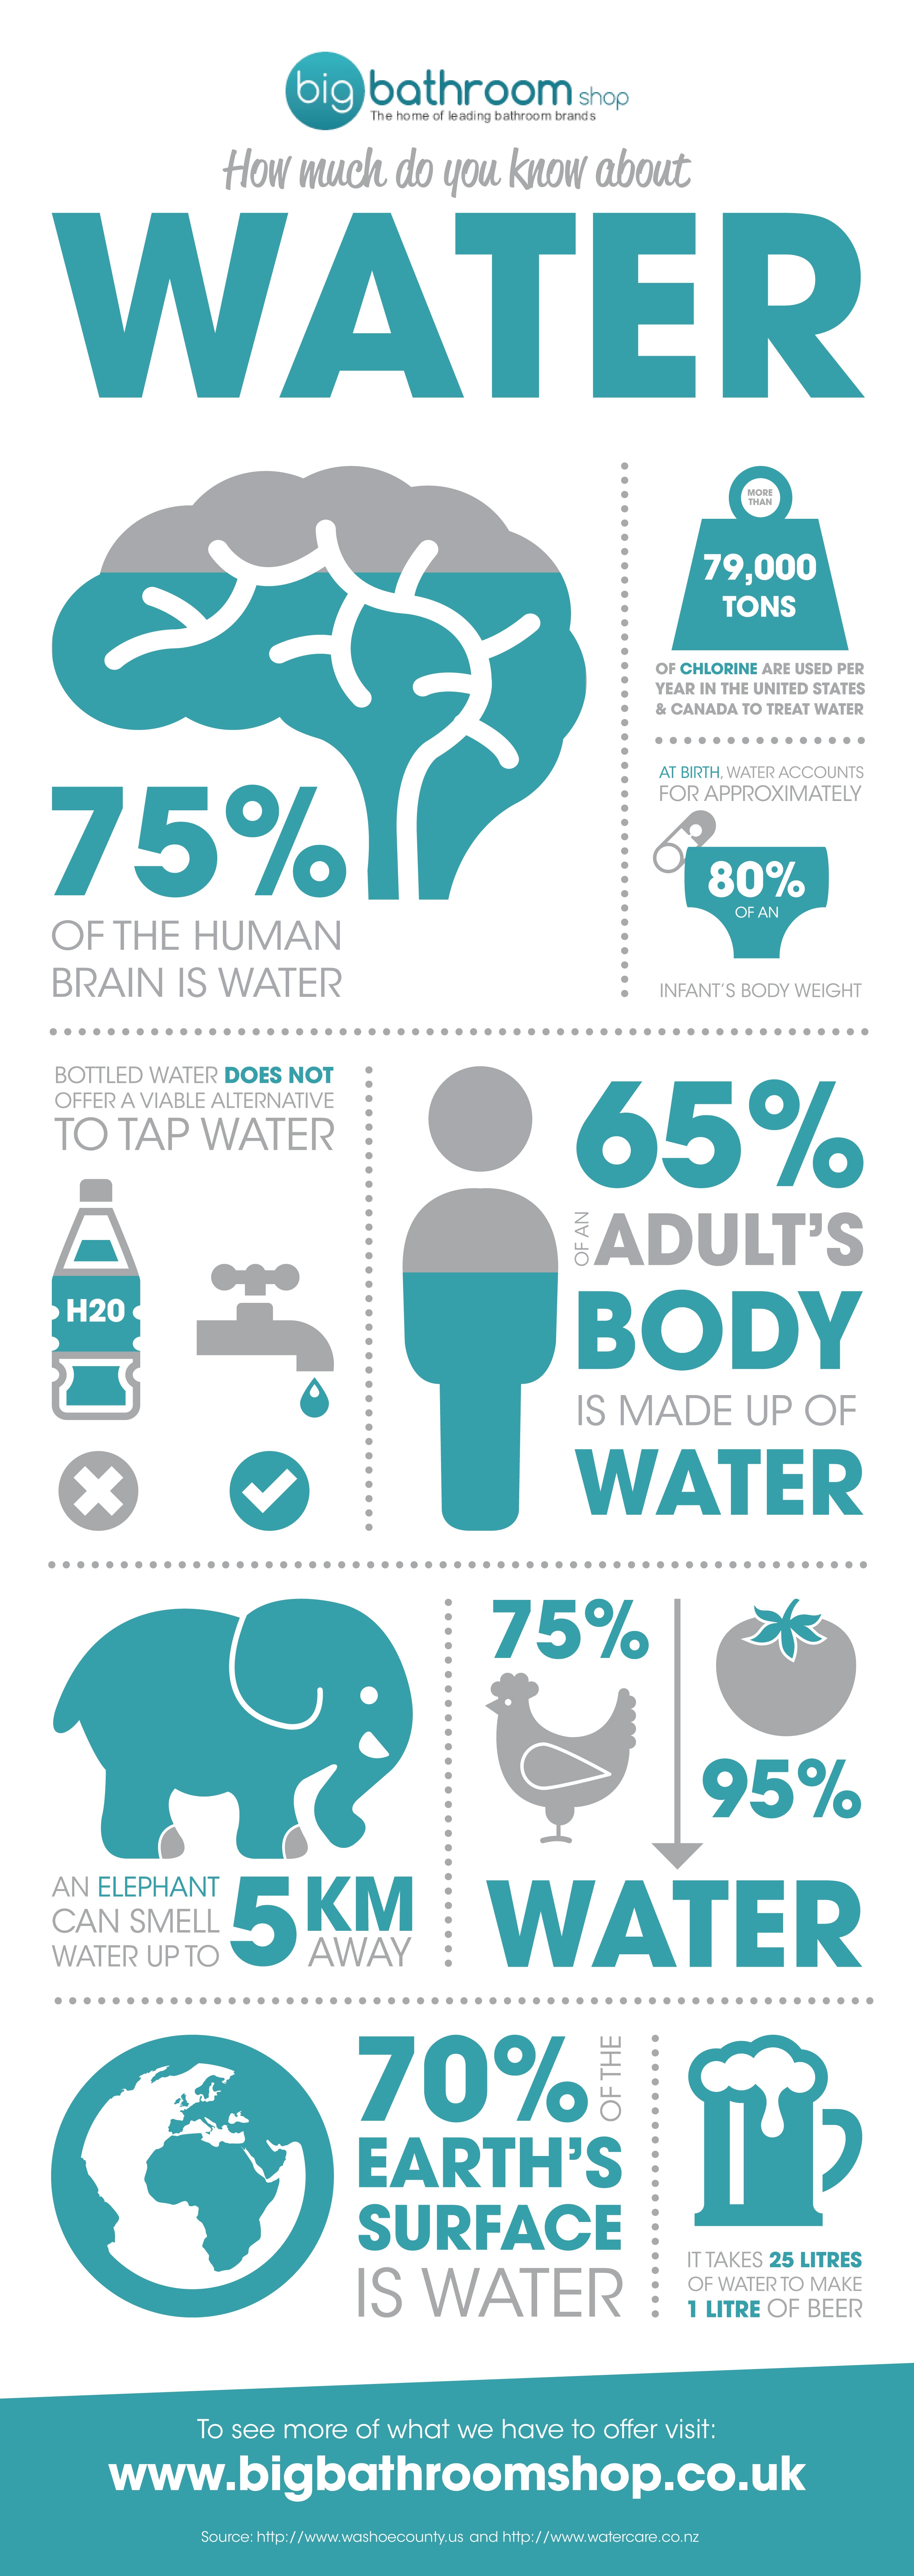 facts about water travel